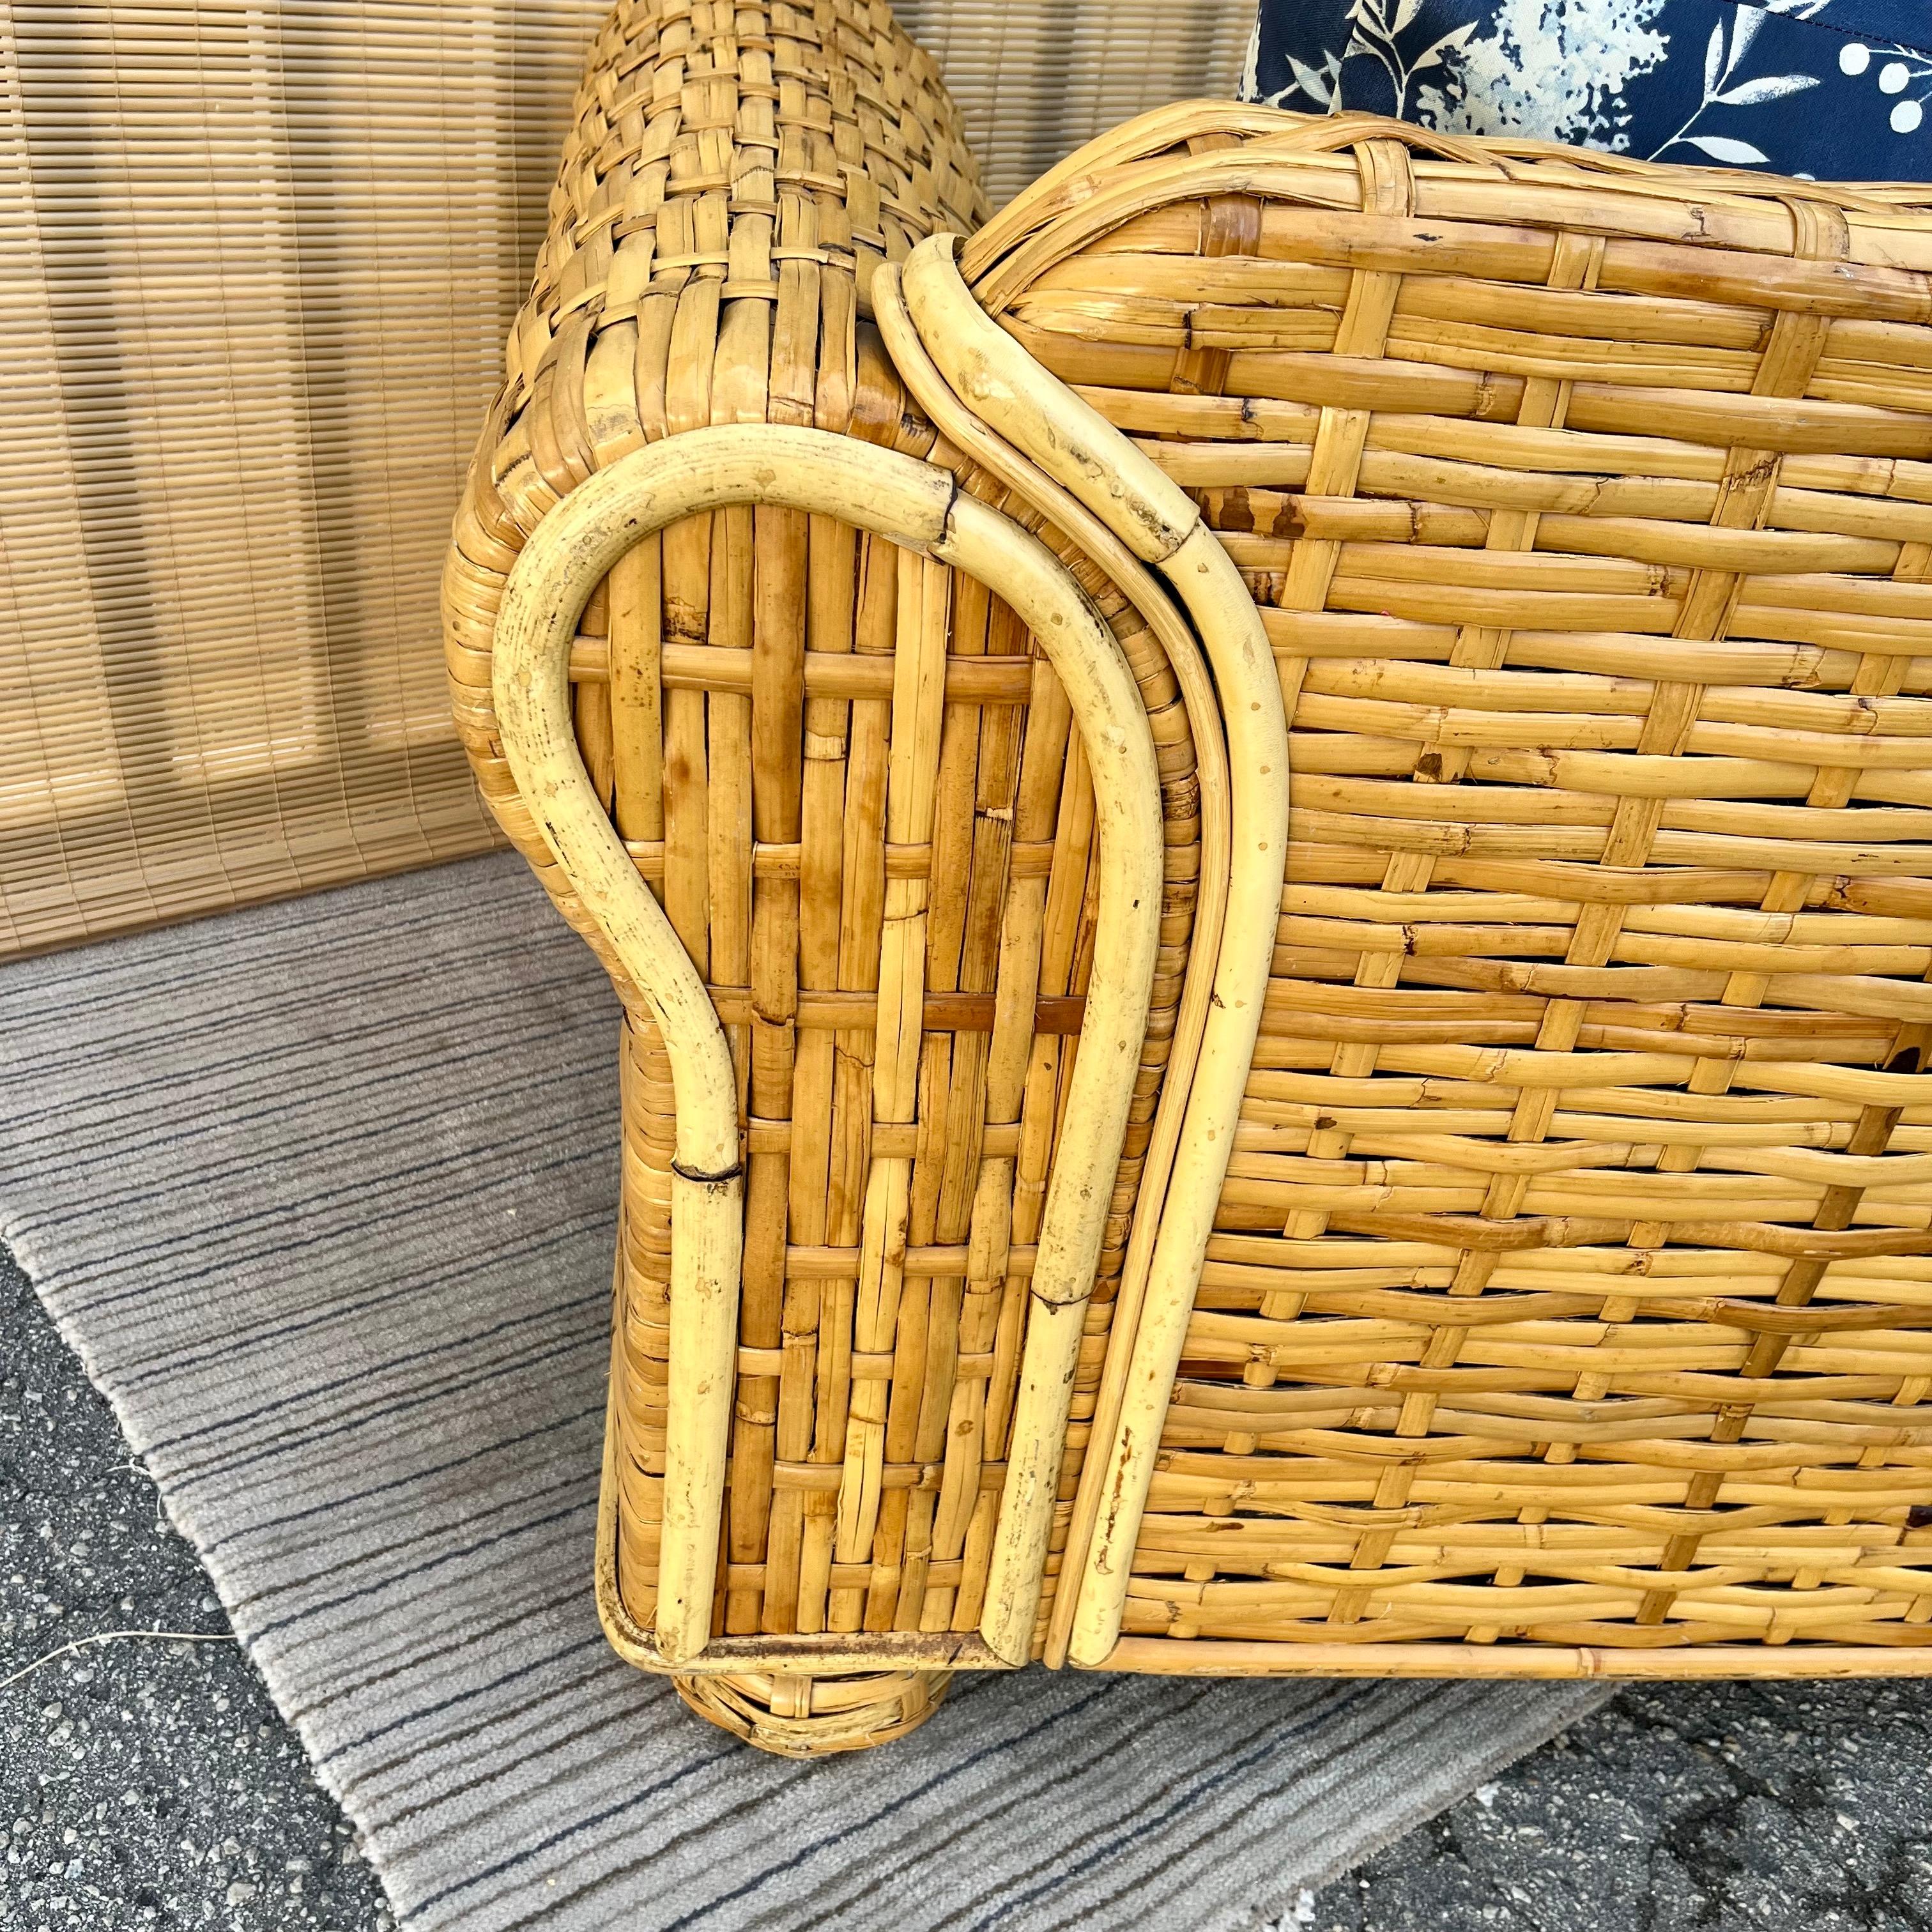 Late 20th Century Ralph Lauren Coastal Style Woven Rattan Lounge Chair For Sale 2